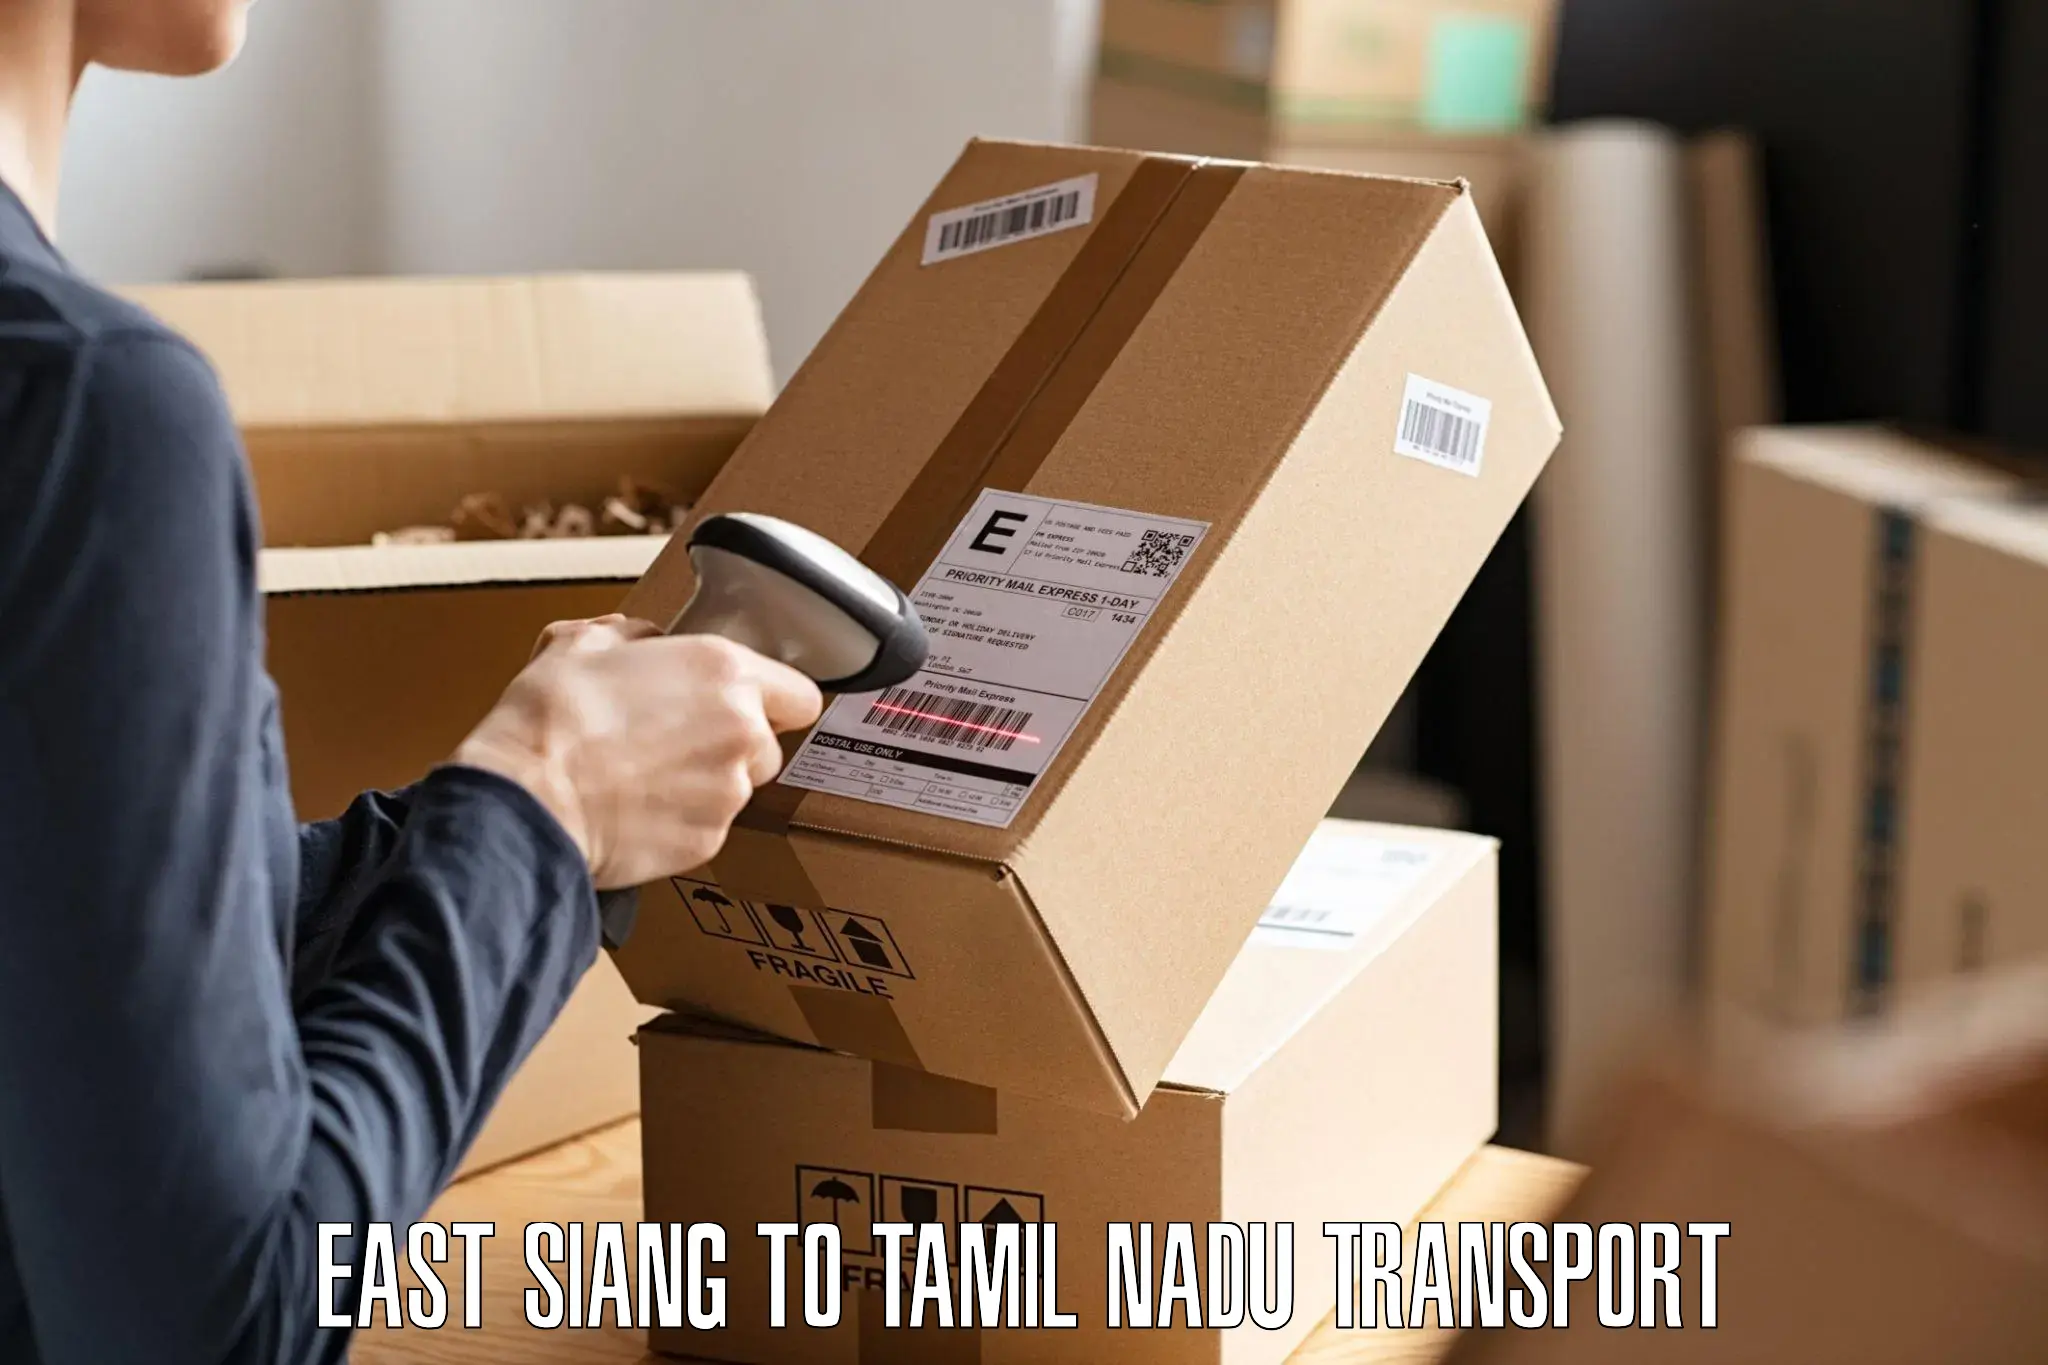 Two wheeler parcel service East Siang to SRM Institute of Science and Technology Chennai